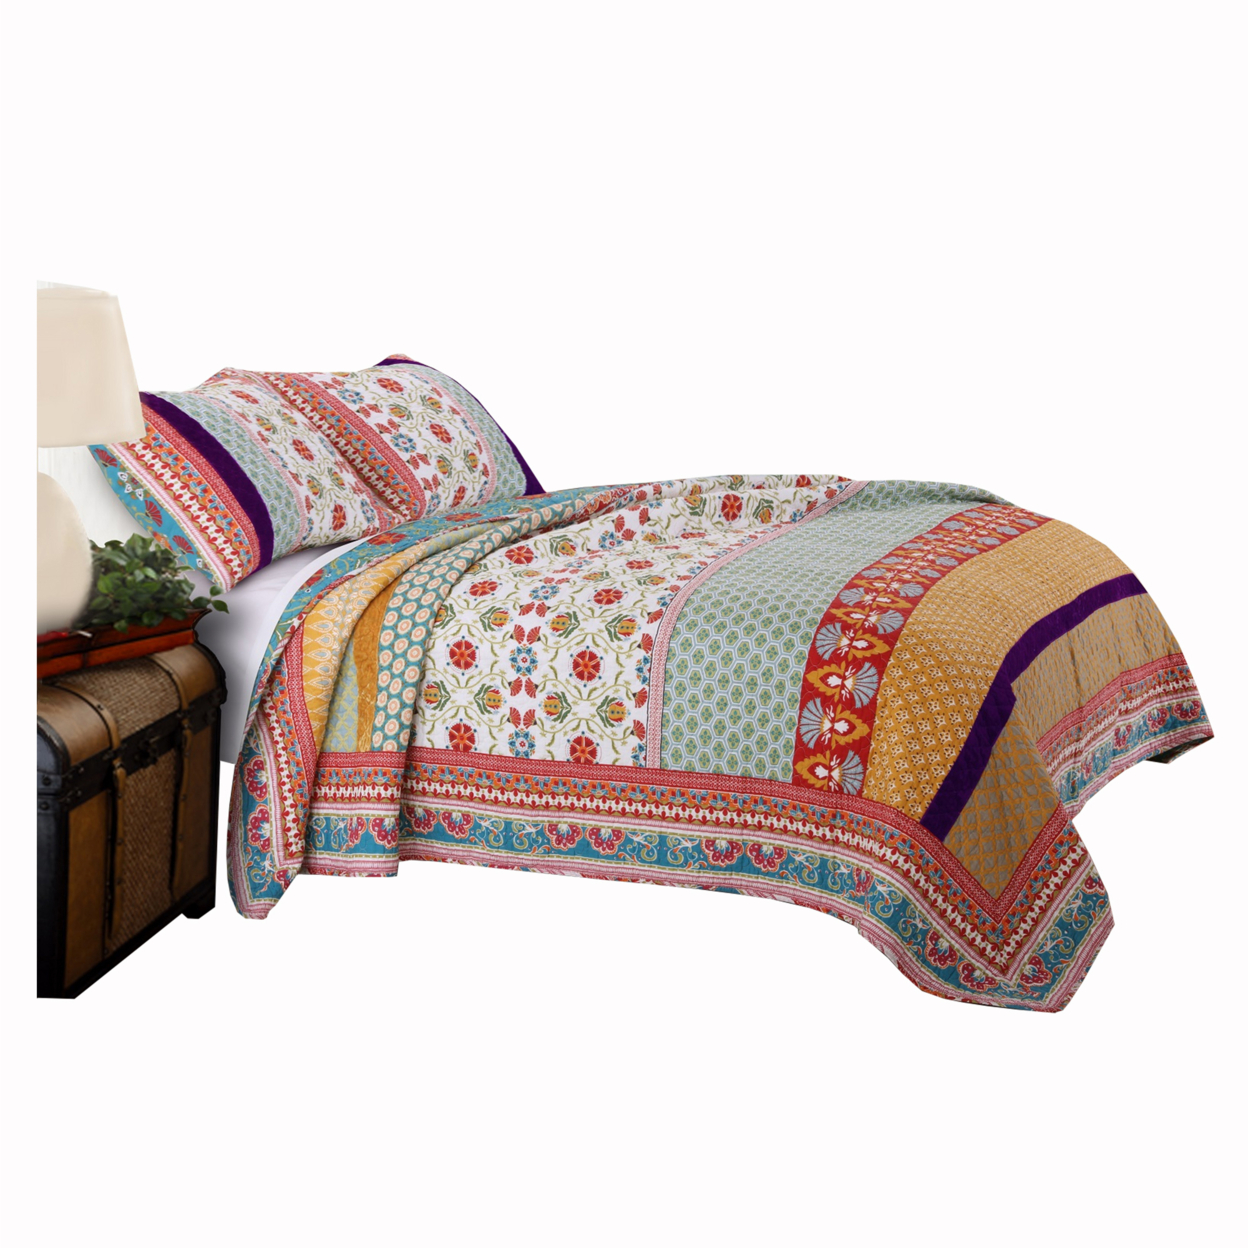 Geometric And Floral Print Full Size Quilt Set With 2 Shams, Multicolor- Saltoro Sherpi